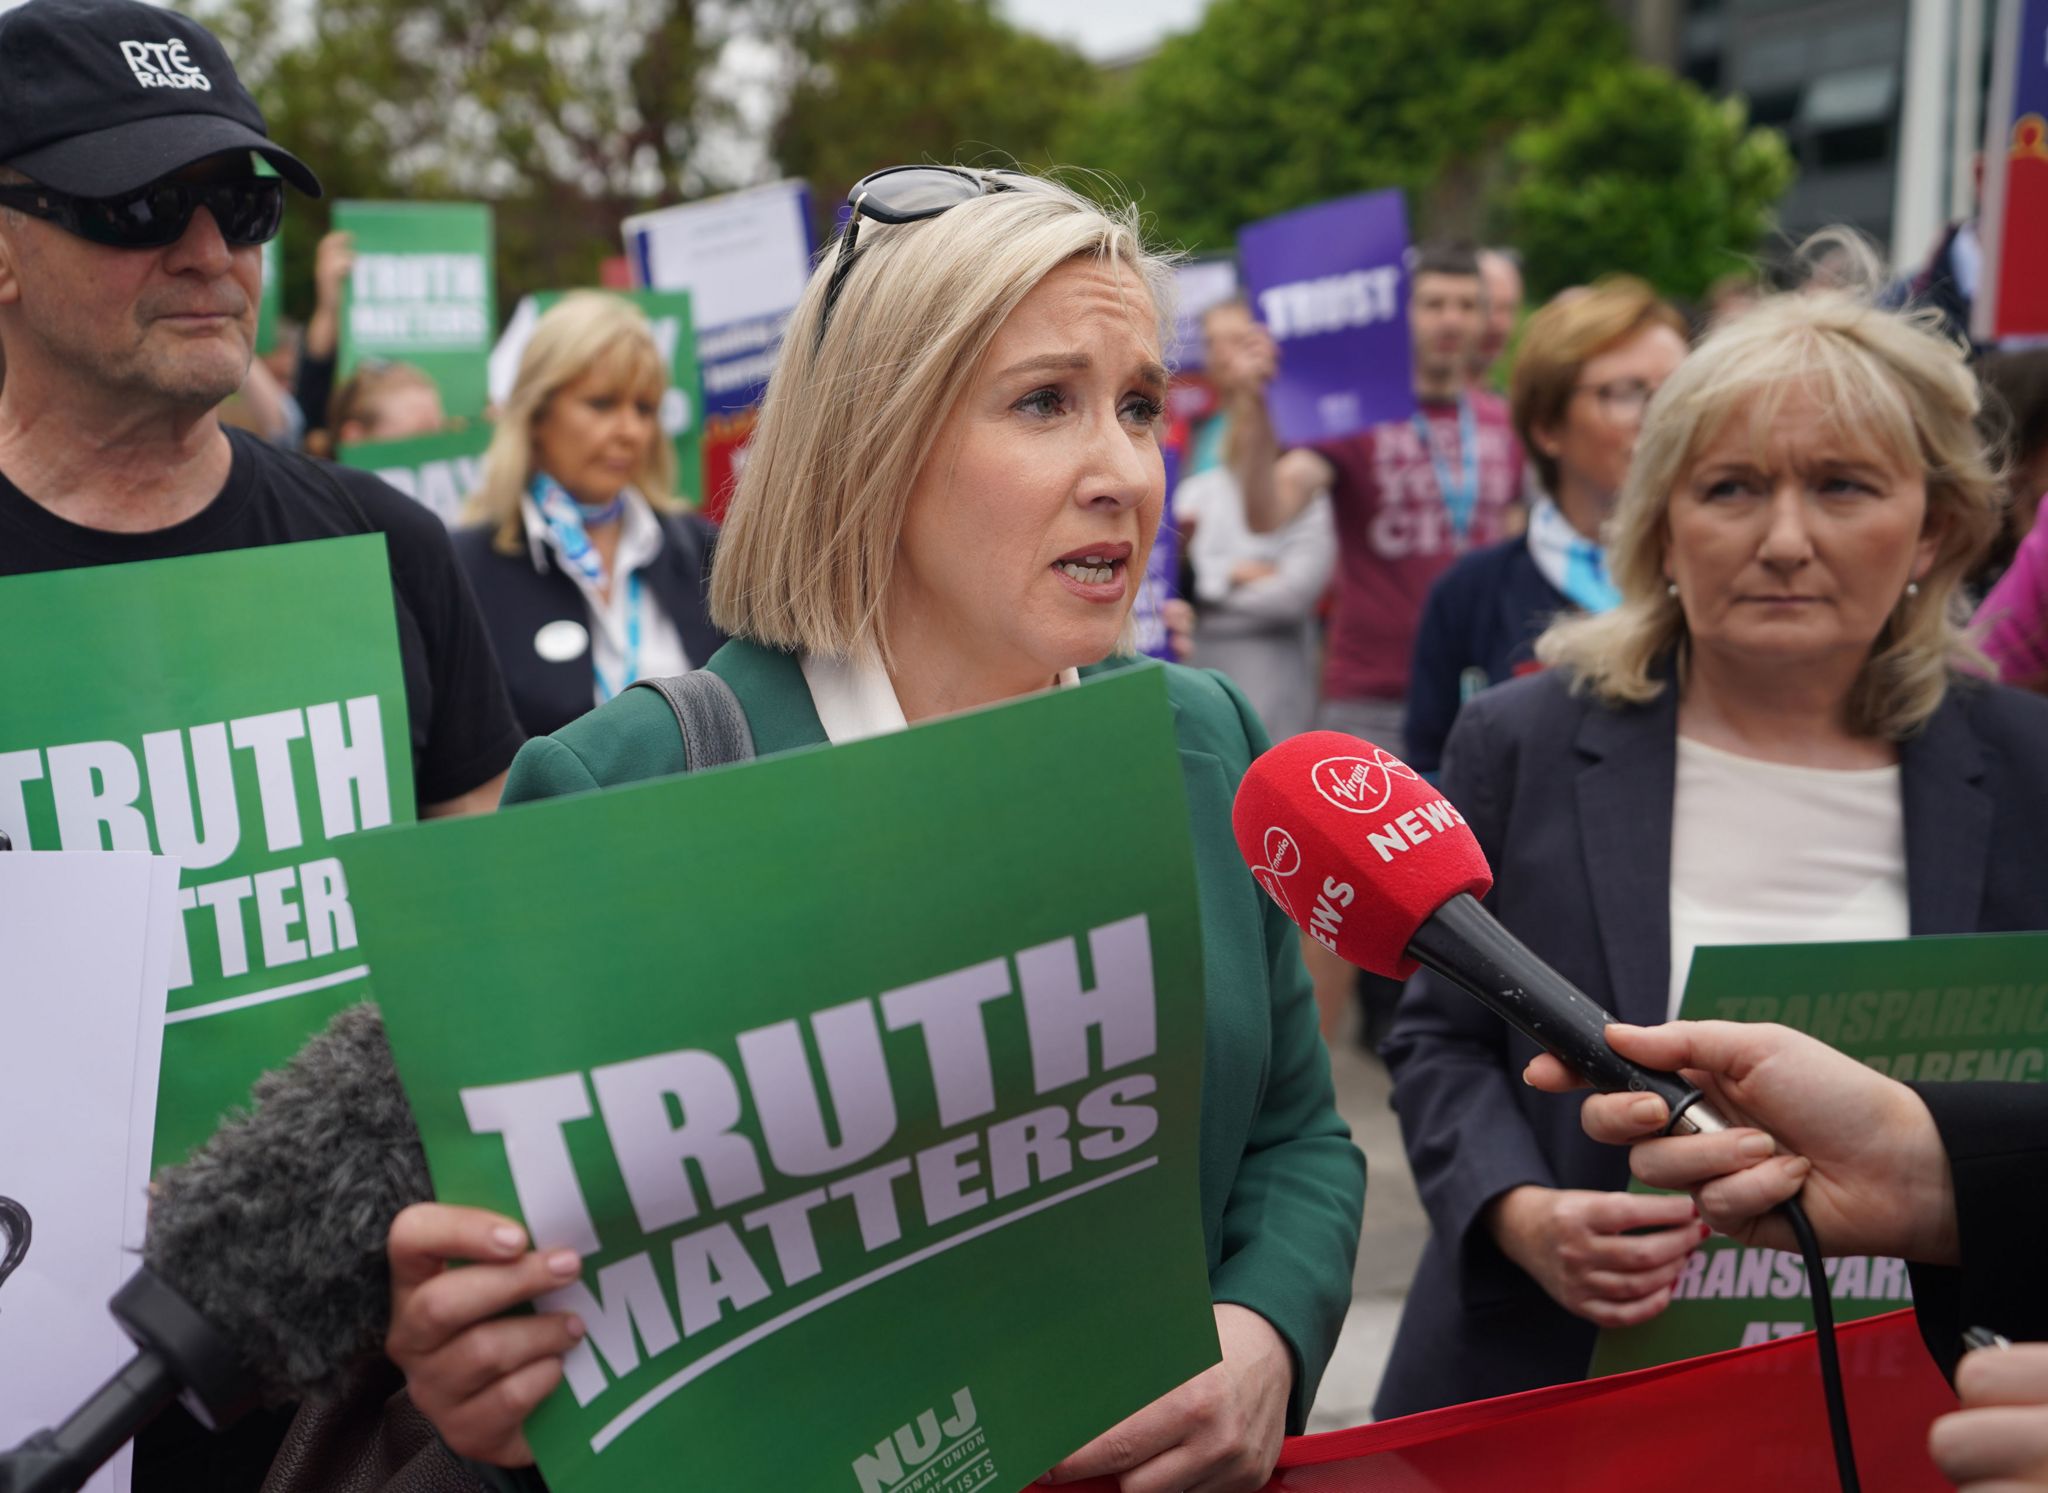 RTÉ staff protesting to call for transparency